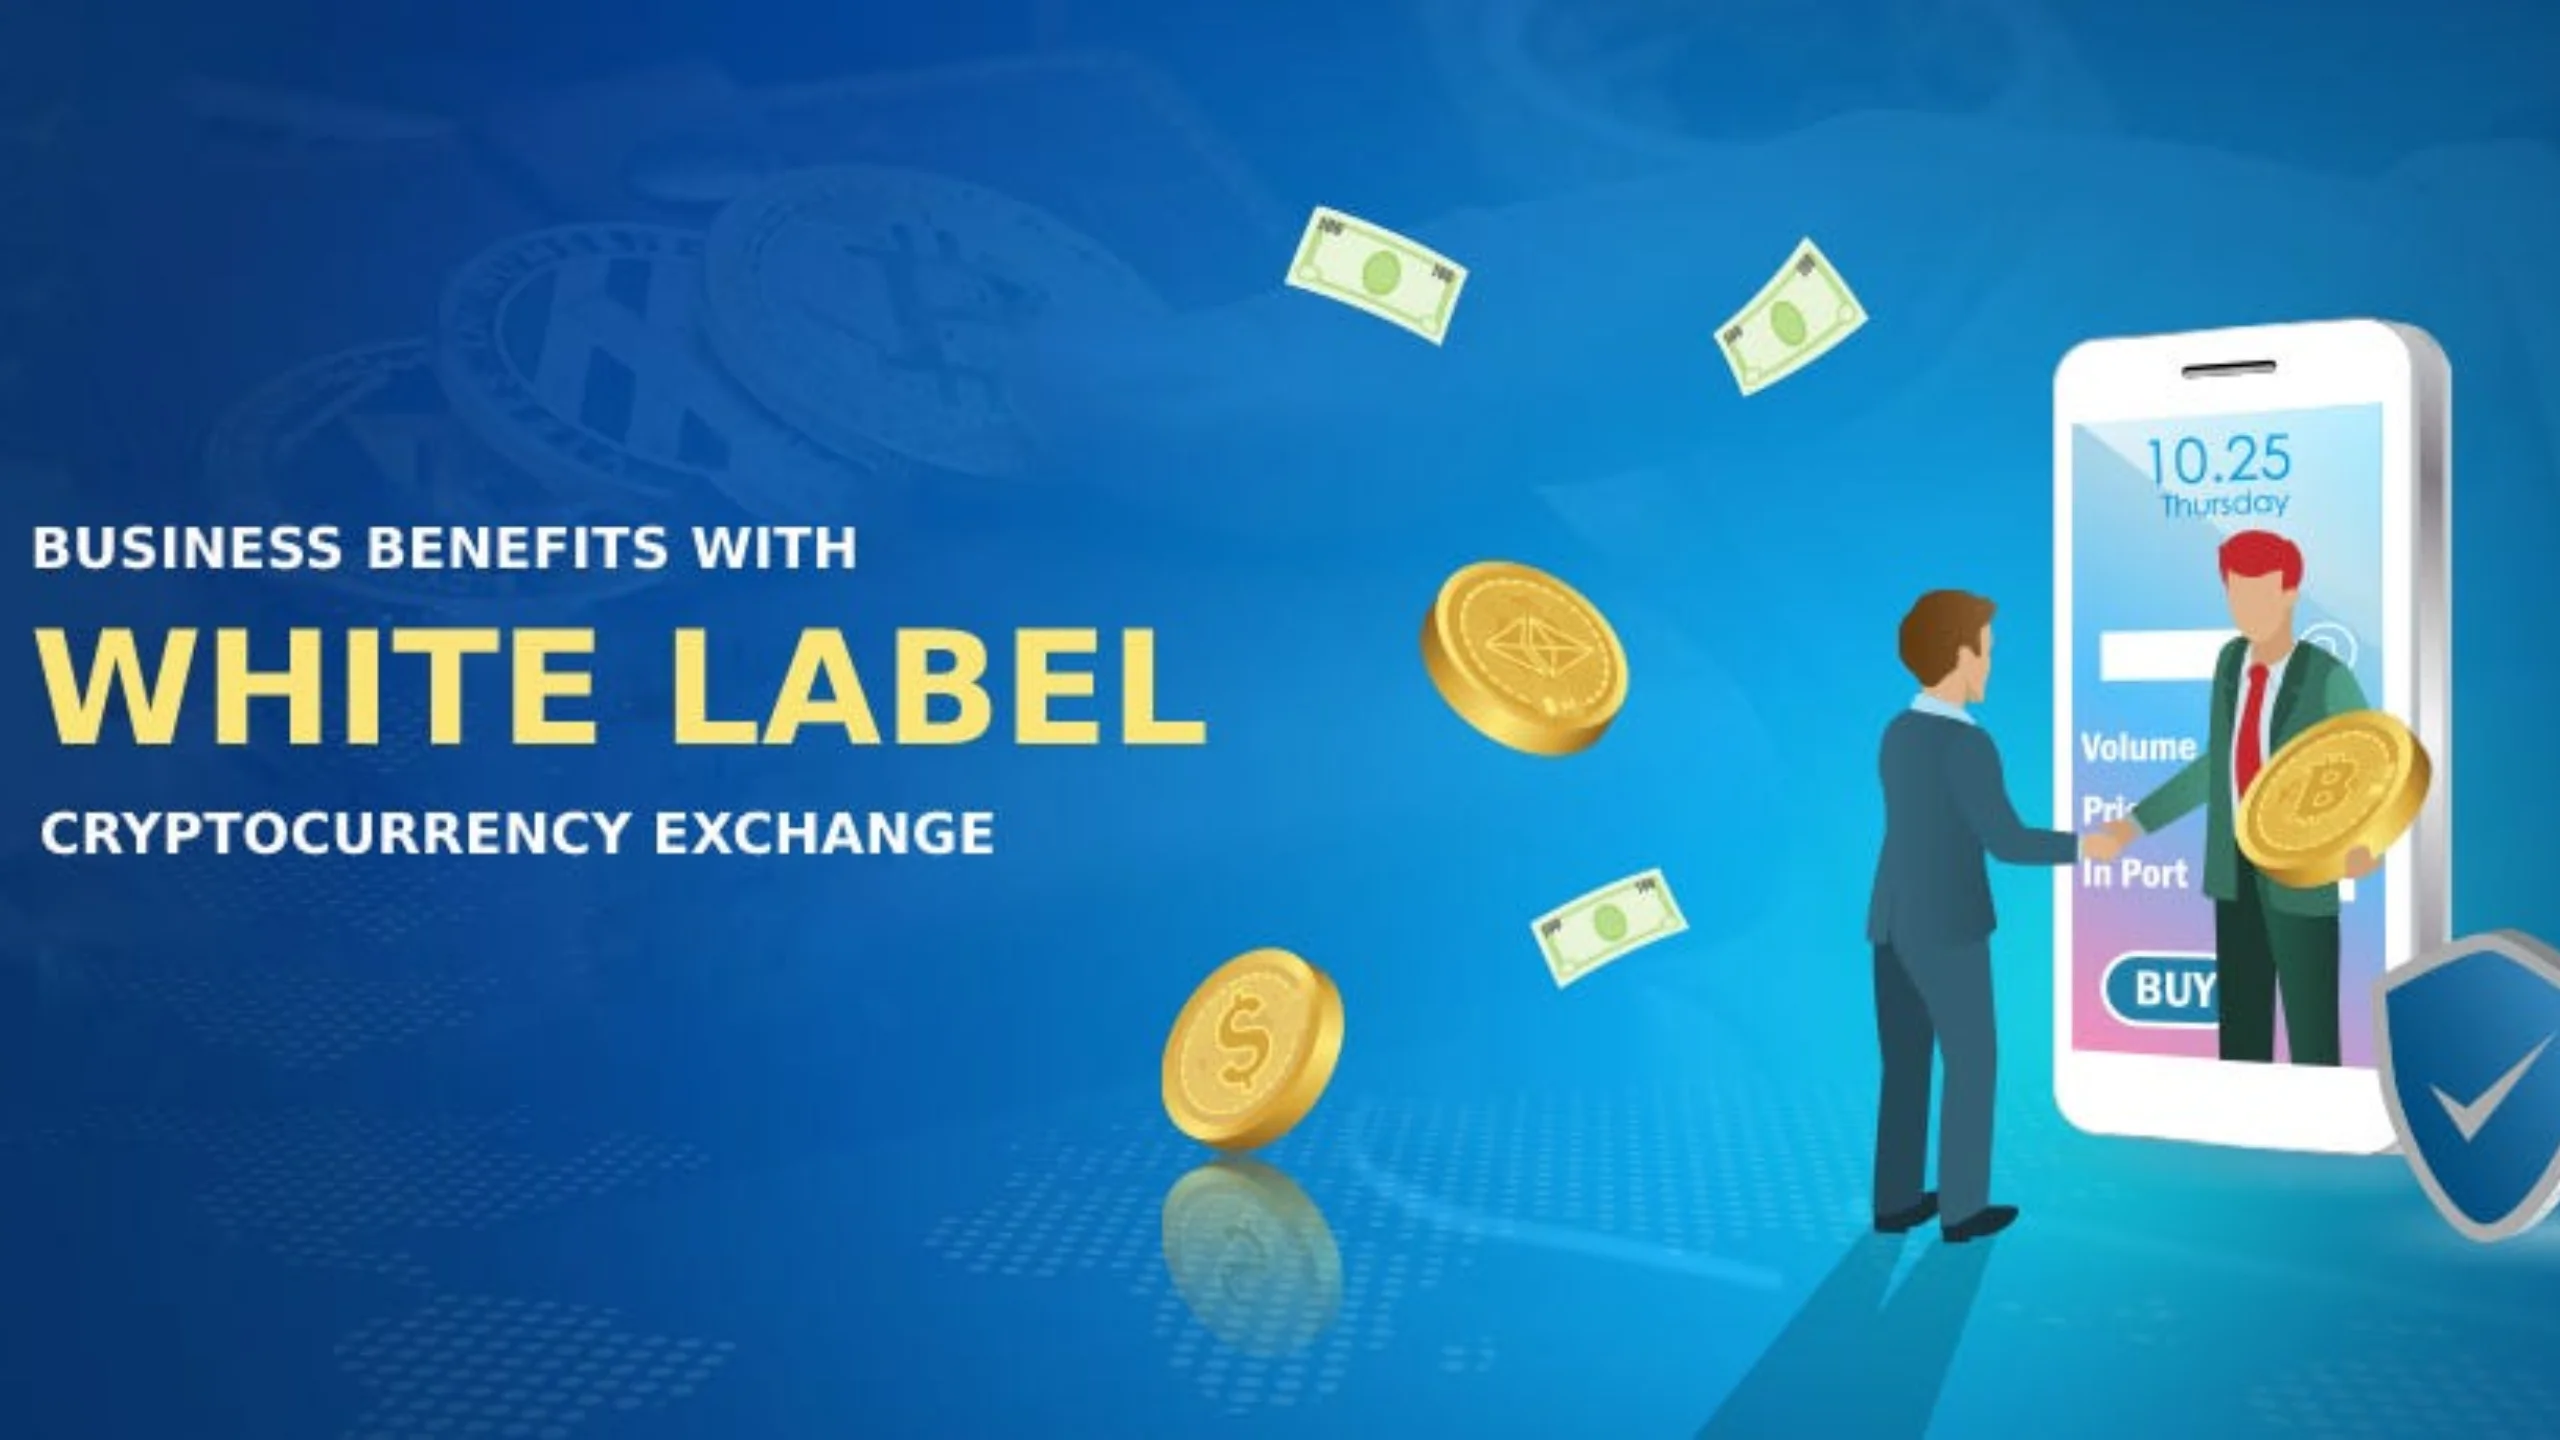 Experience enhanced business growth and flexibility through White Label Cryptocurrency Exchange solutions.